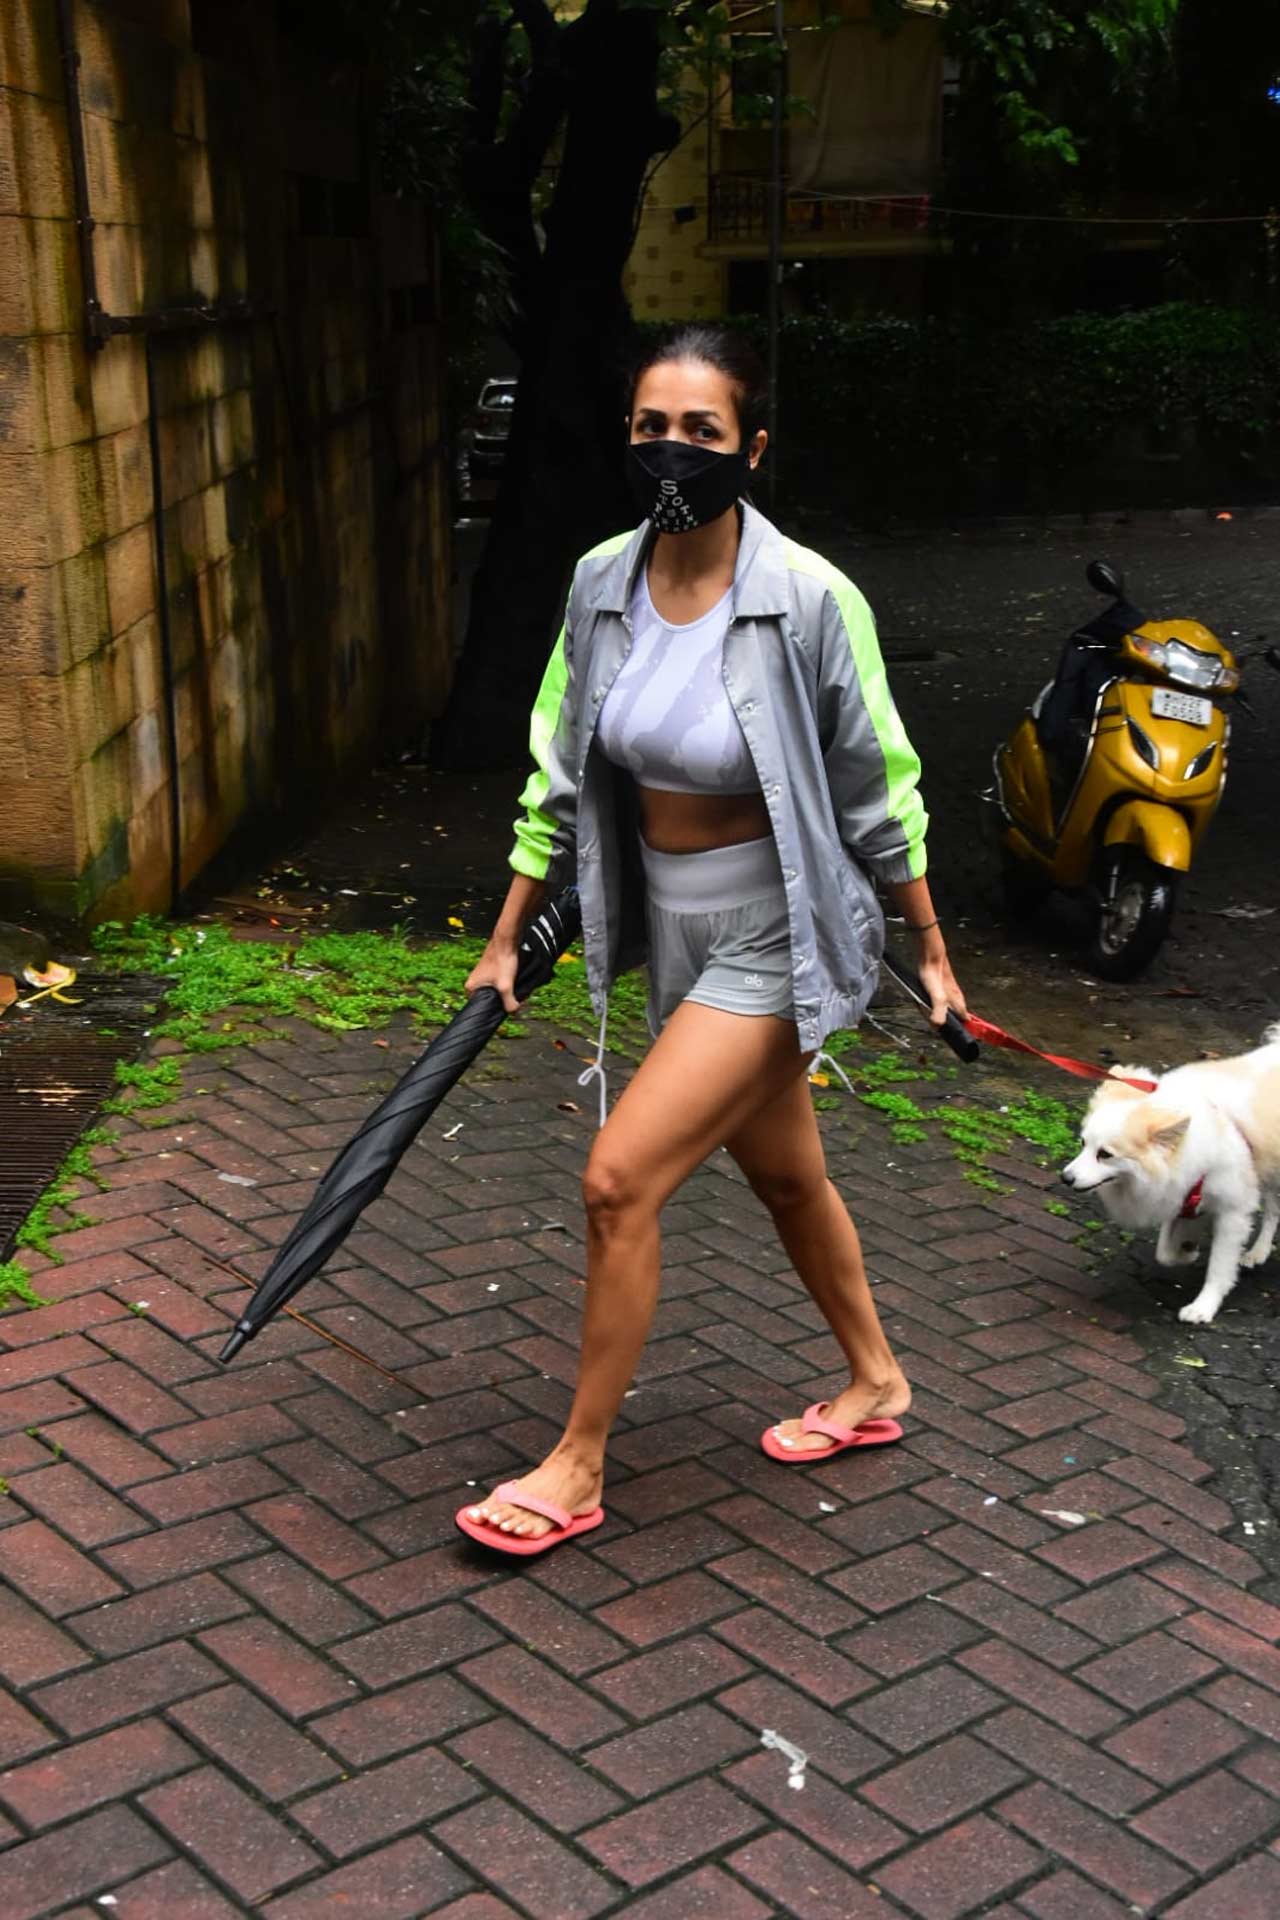 Malaika Arora is often spotted for her walks with her pet and this occasion was no exception. Arora recently shared an emotional message for her son Arhaan Khan, who has recently left for higher studies. Taking to her Instagram handle on Tuesday, the glamourous mom posted a beautiful picture of the mother-son duo, saying 